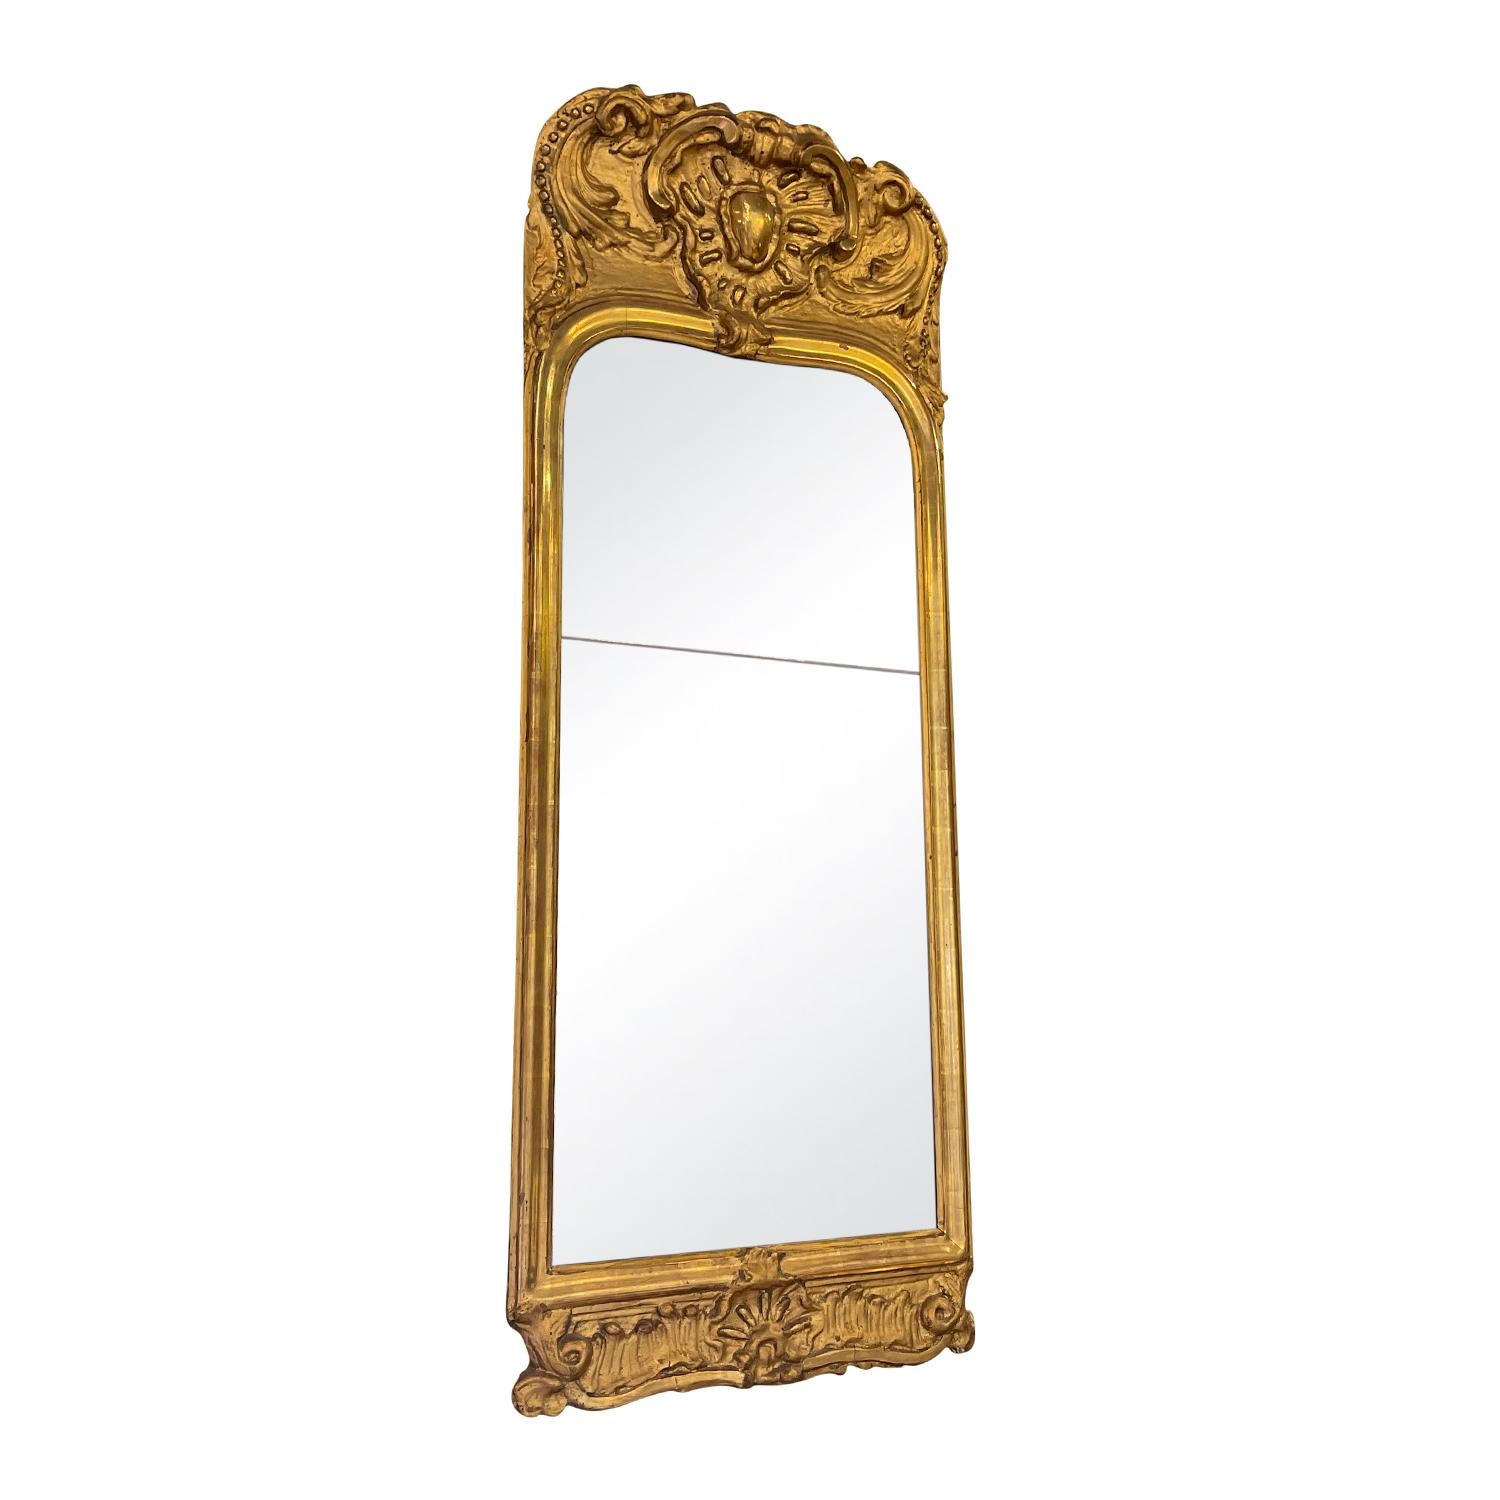 A gold antique French Rocaille décor gilded wood mirror with facet, in good condition. The mirrored glass is original. The mirror represents the Rococo time period. Minor fading, due to age. Wear consistent with age and use. Circa 1760, France.
    